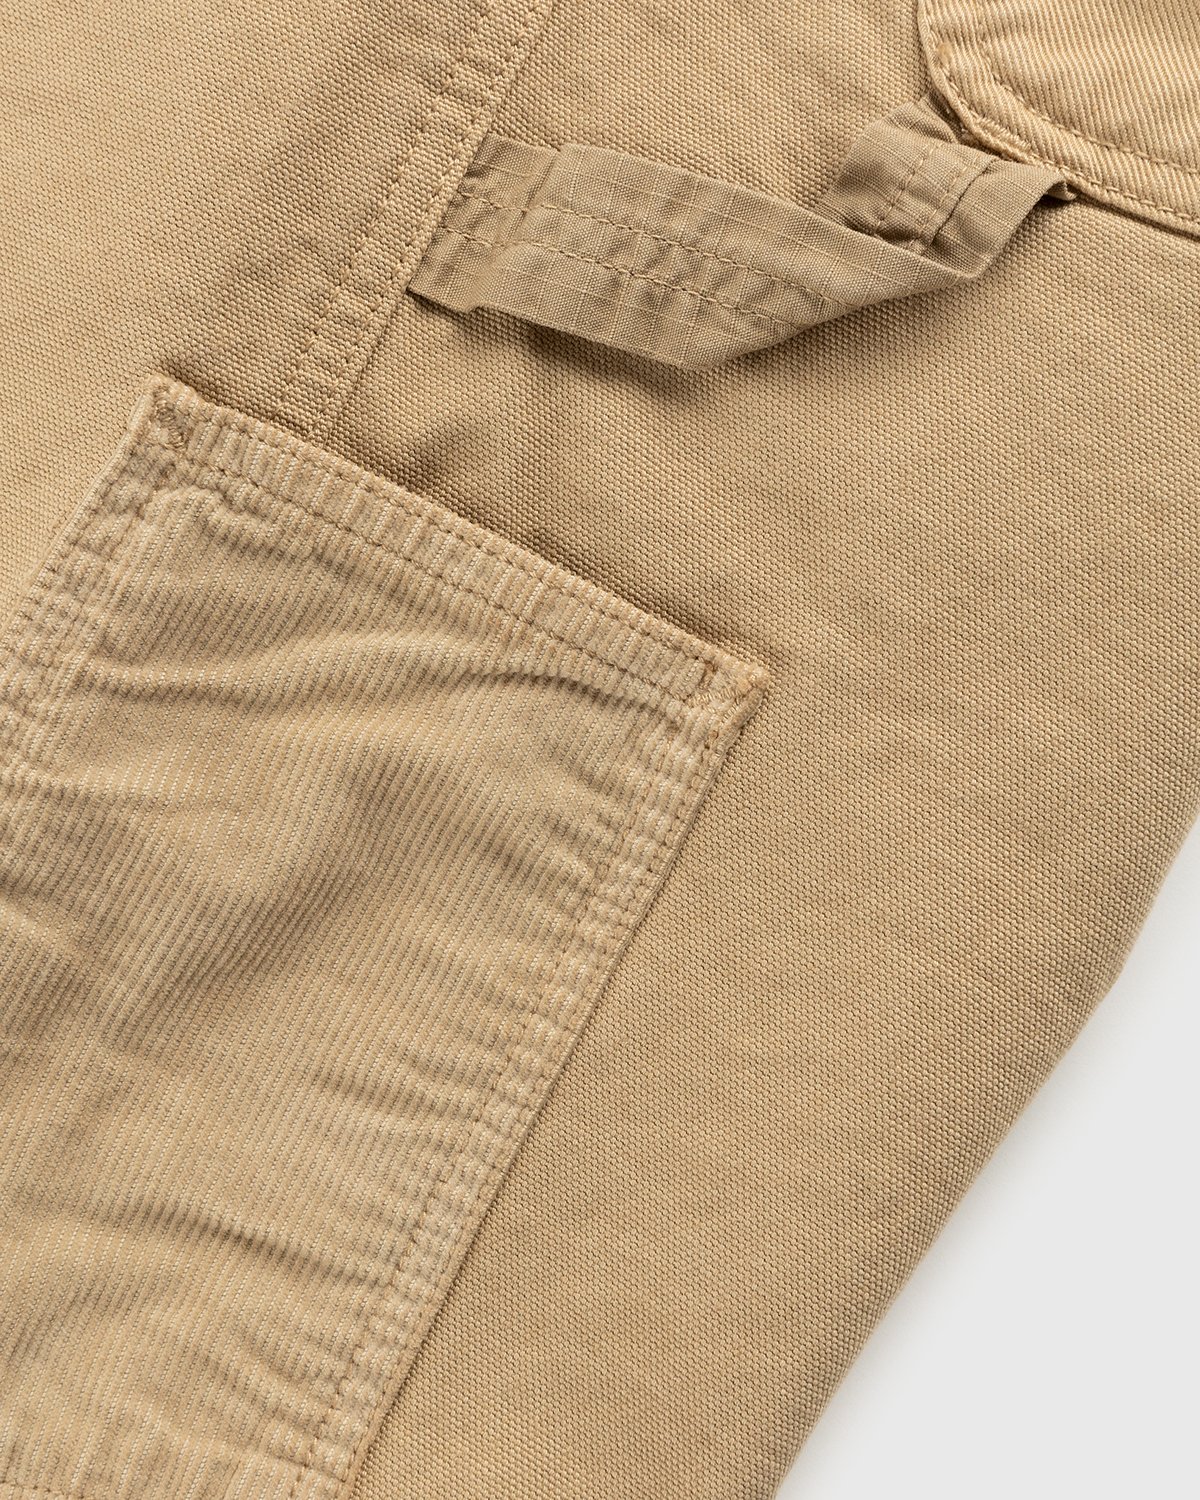 Carhartt WIP - Medley Pant Dusty Hamilton Brown Garment Dyed - Clothing - Brown - Image 6